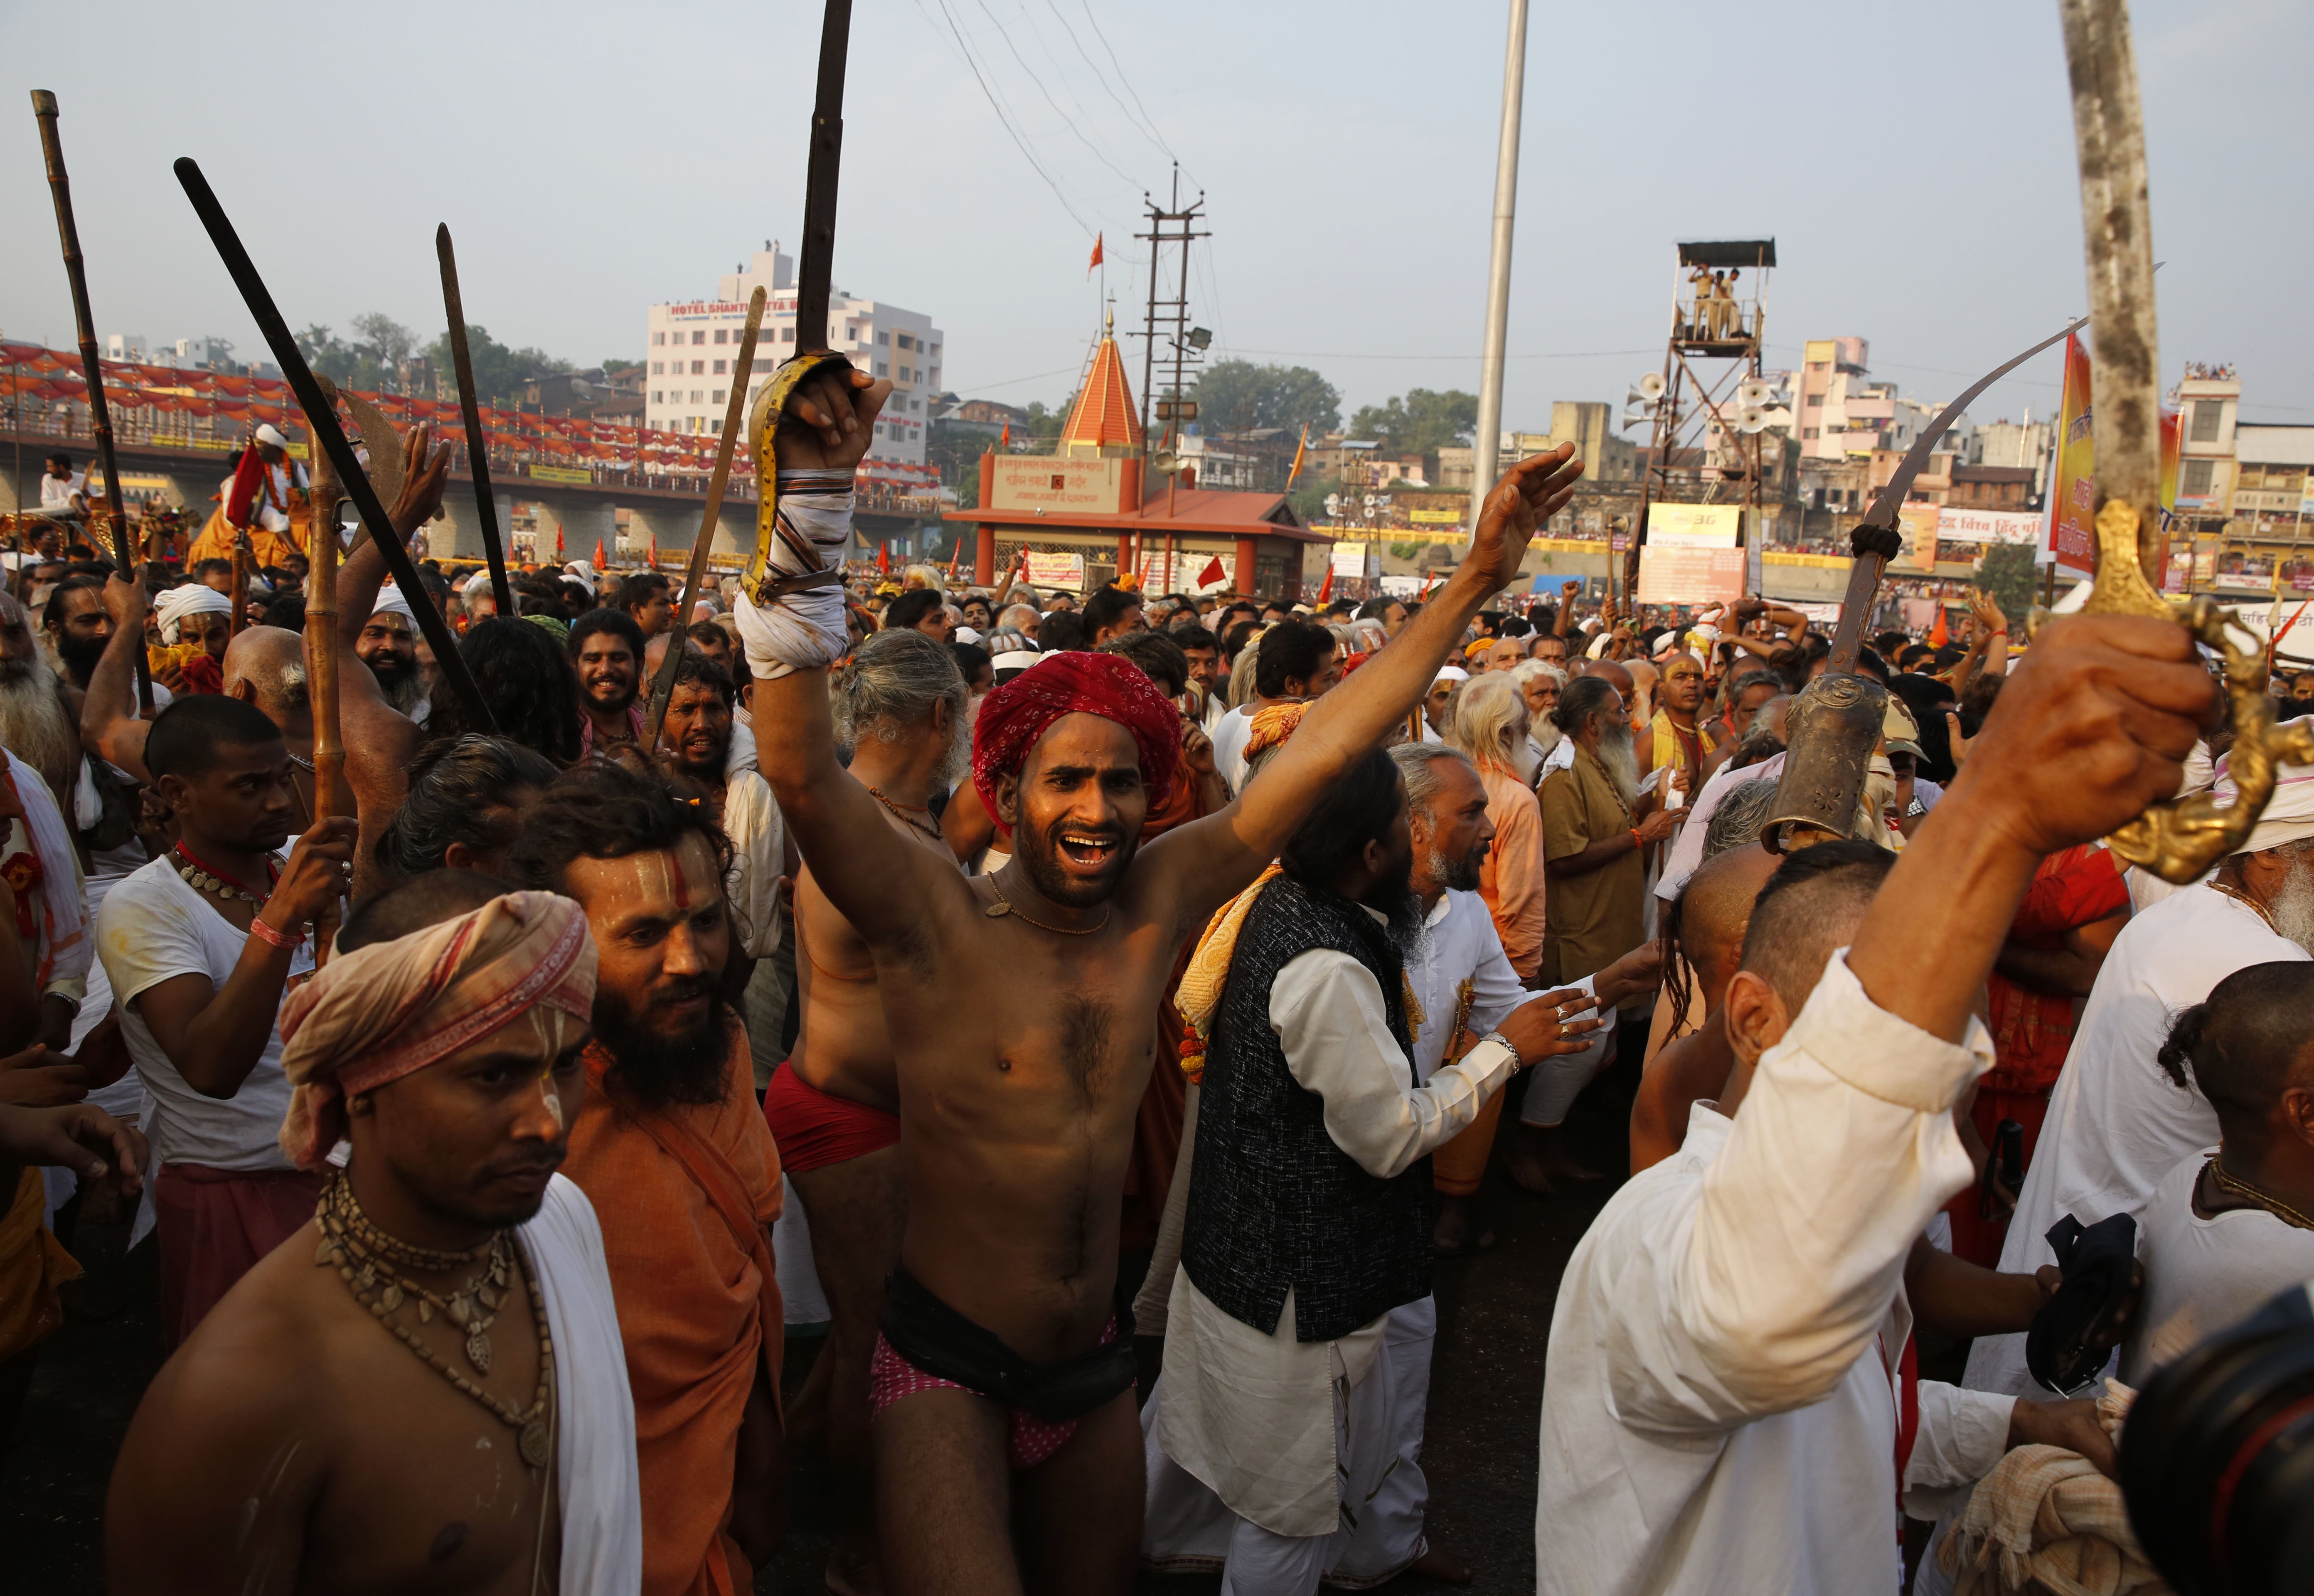 Indian Hindu holy men shout slogans as they arrive for holy dip on the second  shahi snan  or royal bath in the river Godavari during the ongoing Kumbh Mela in Nasik, India, on Sept. 13, 2015.